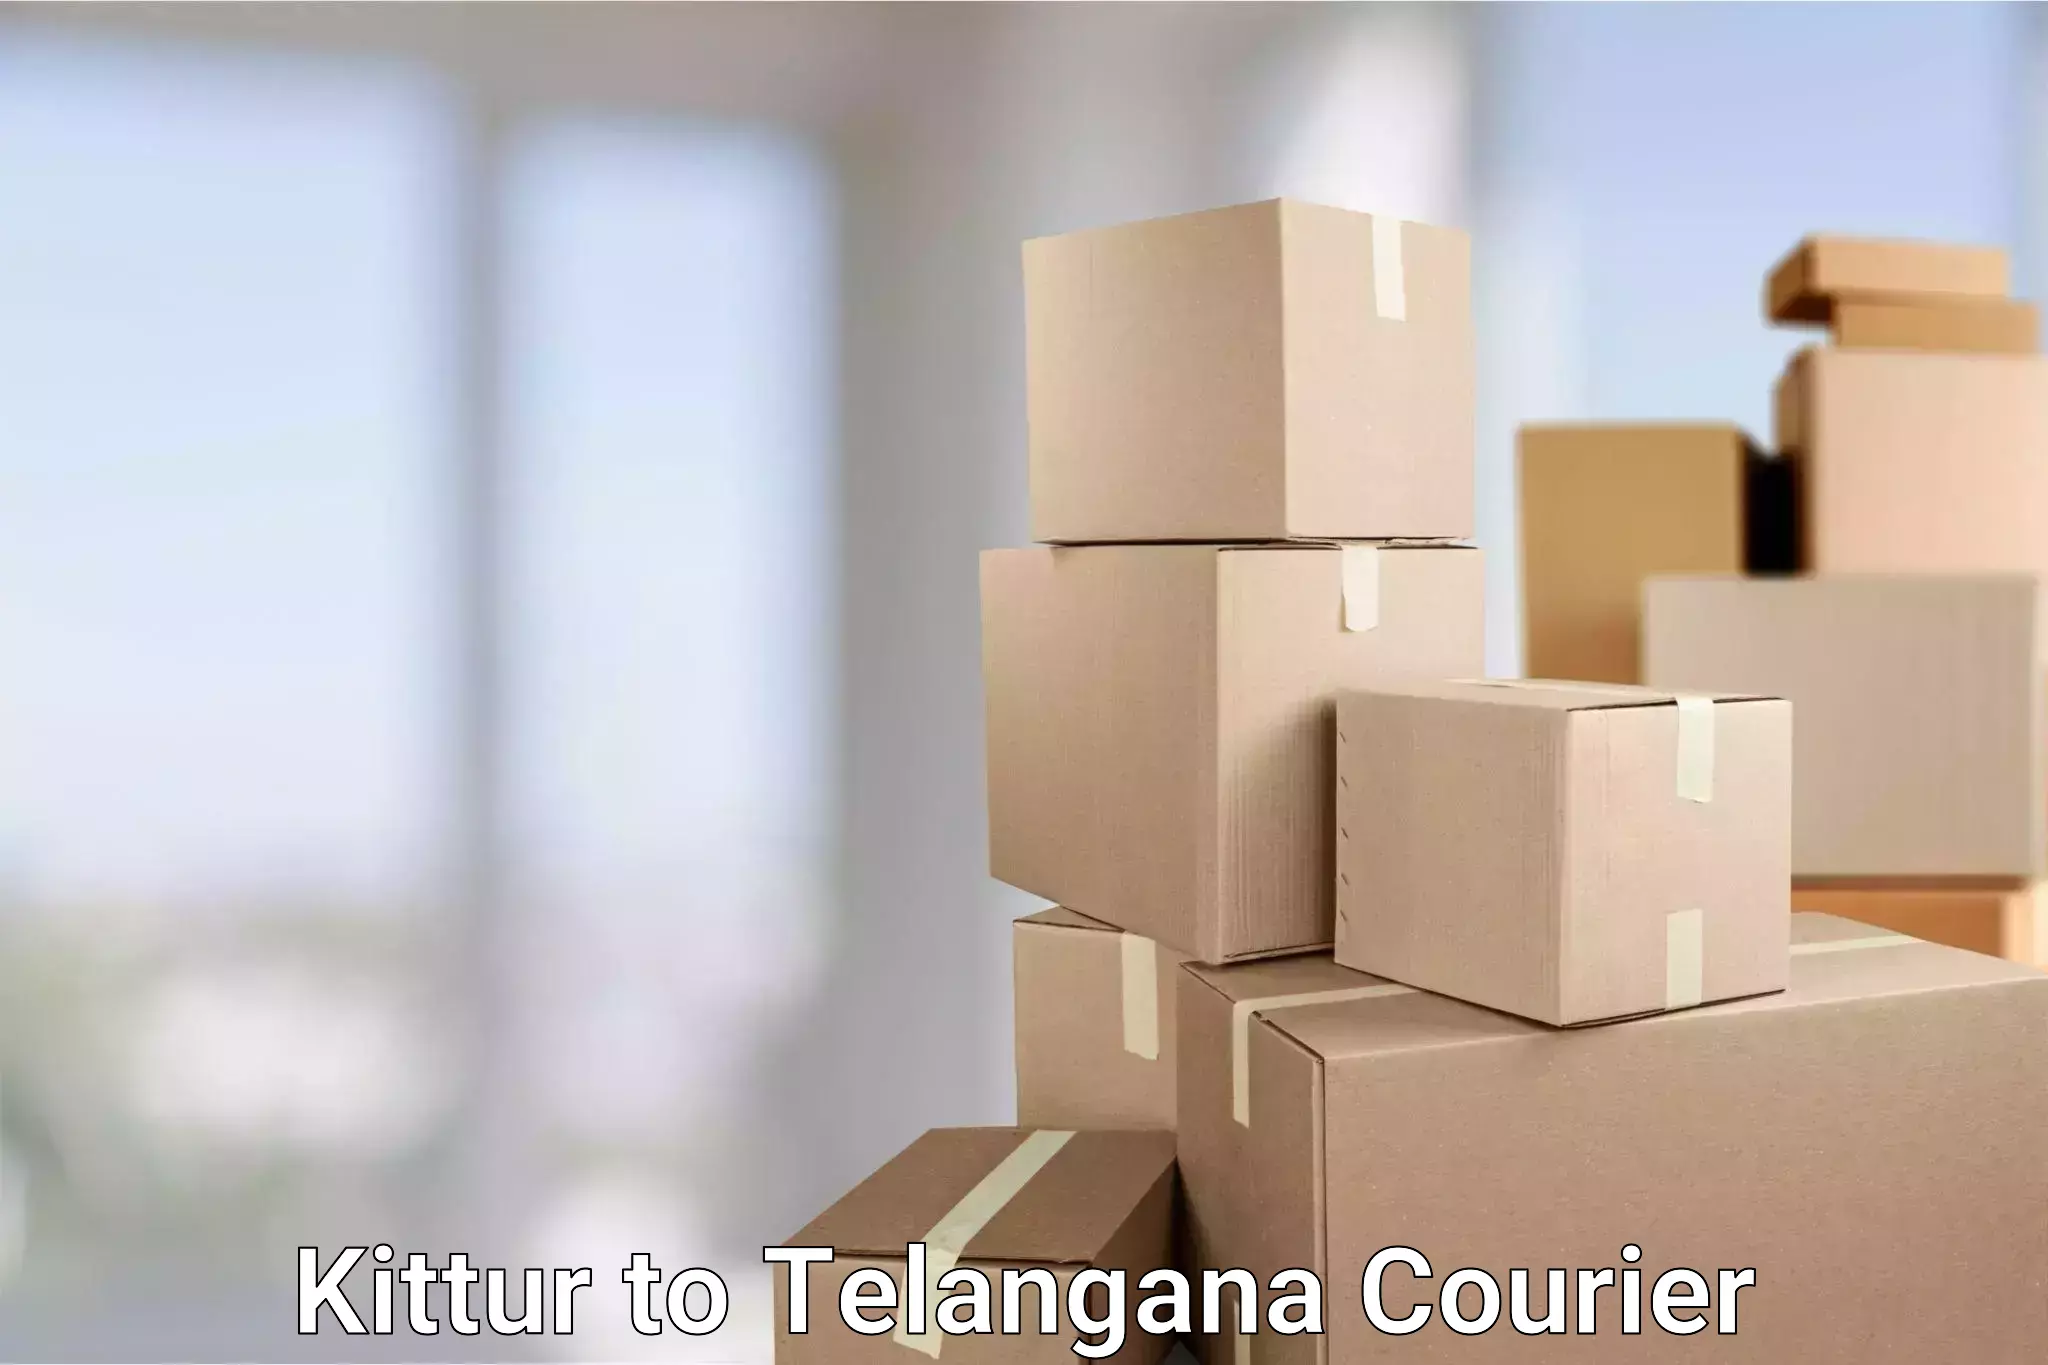 Customized delivery options in Kittur to Bhuvanagiri